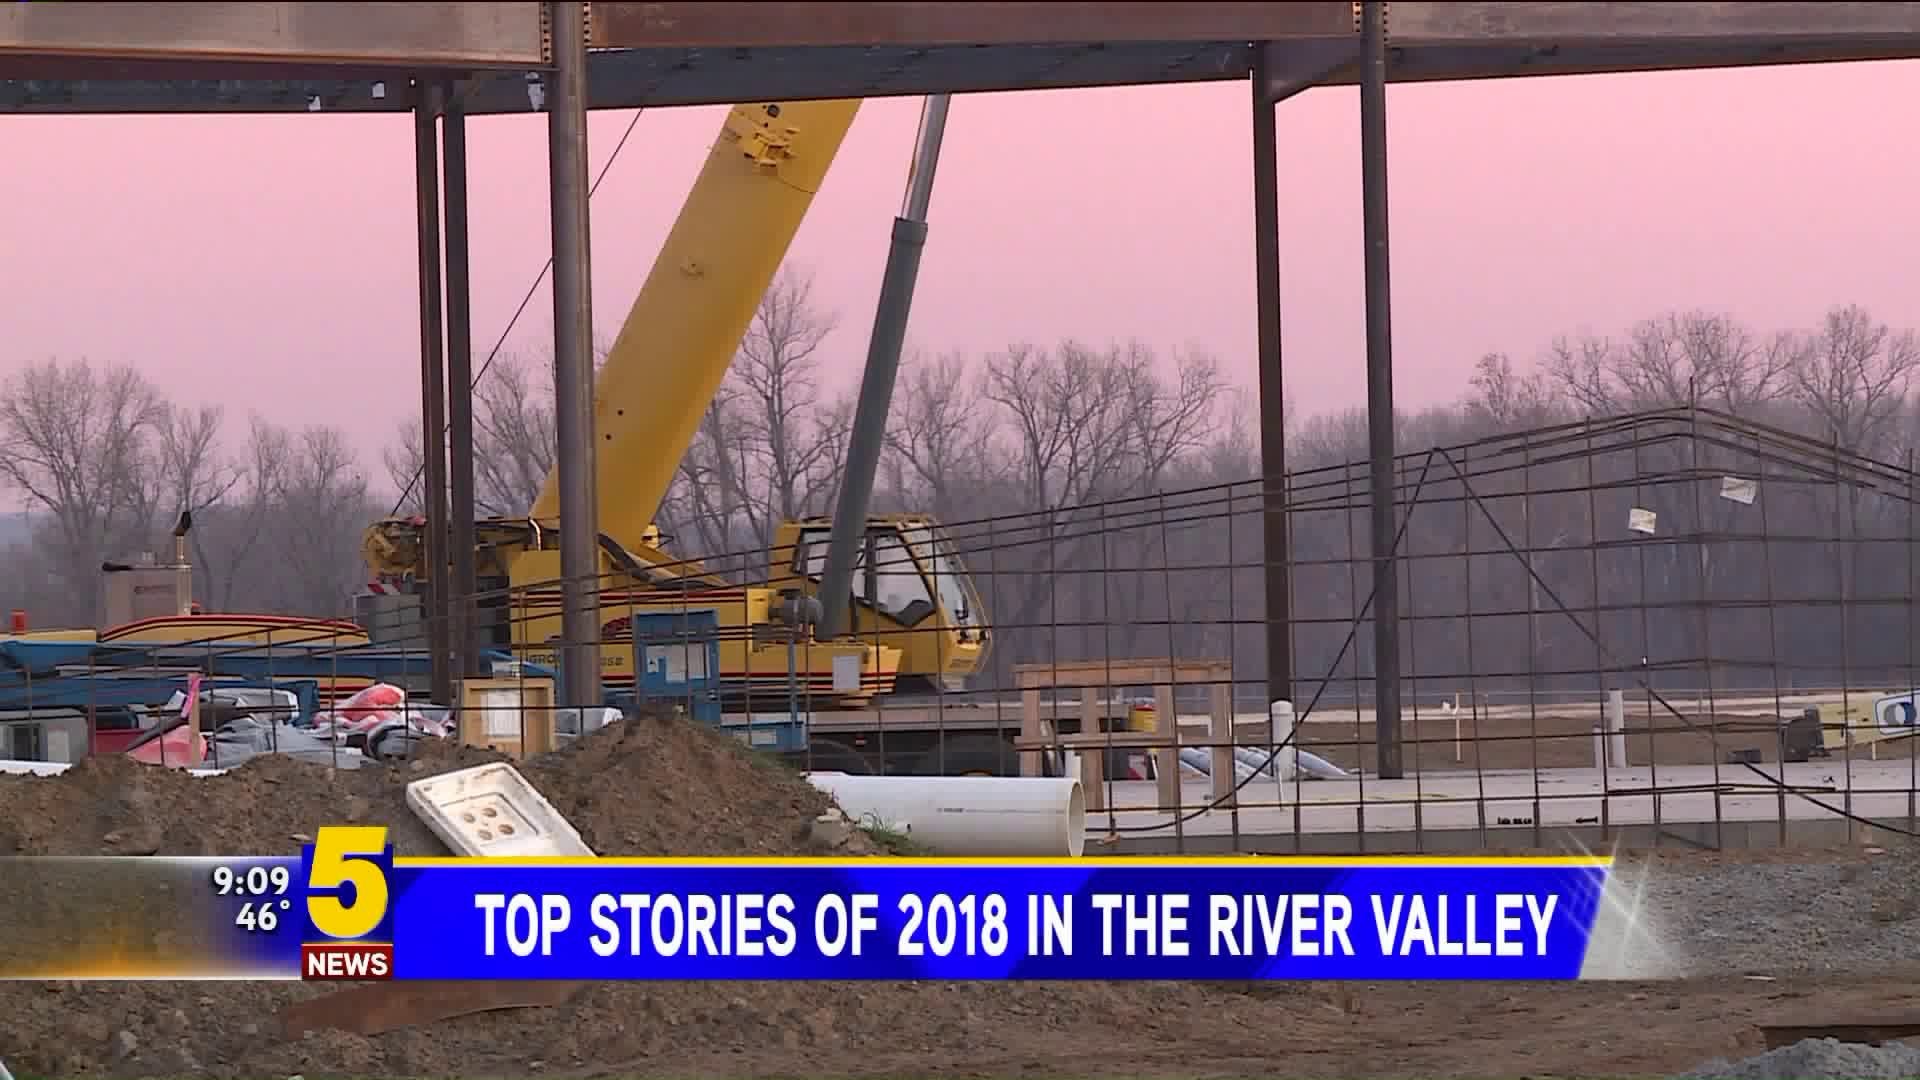 Top stories of 2018 in the River Valley